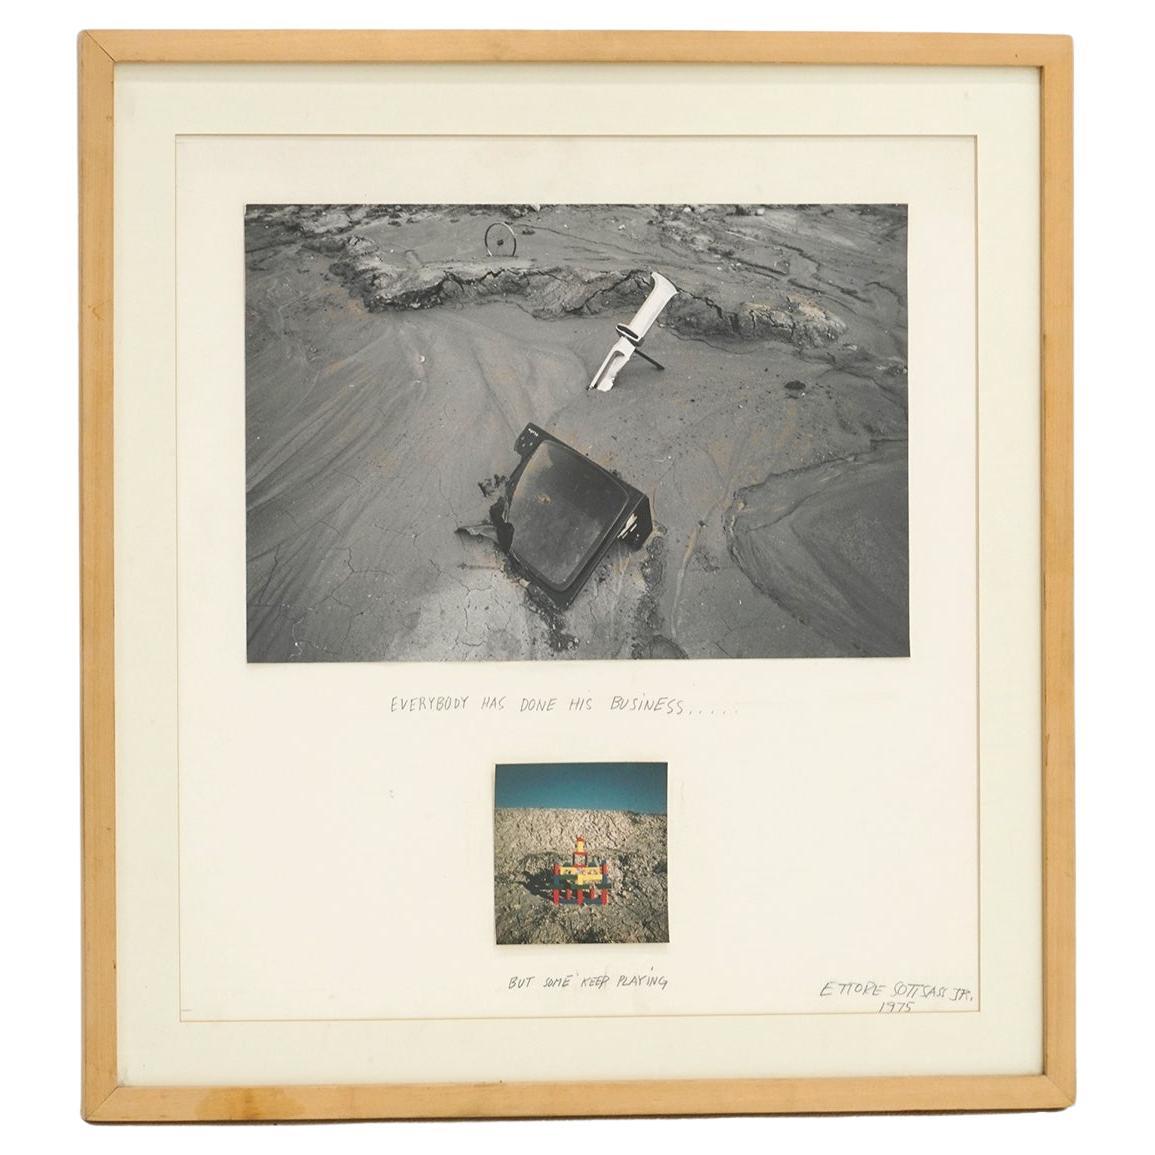 Original Ettore Sottsass Photography Art, 1975. Signed For Sale